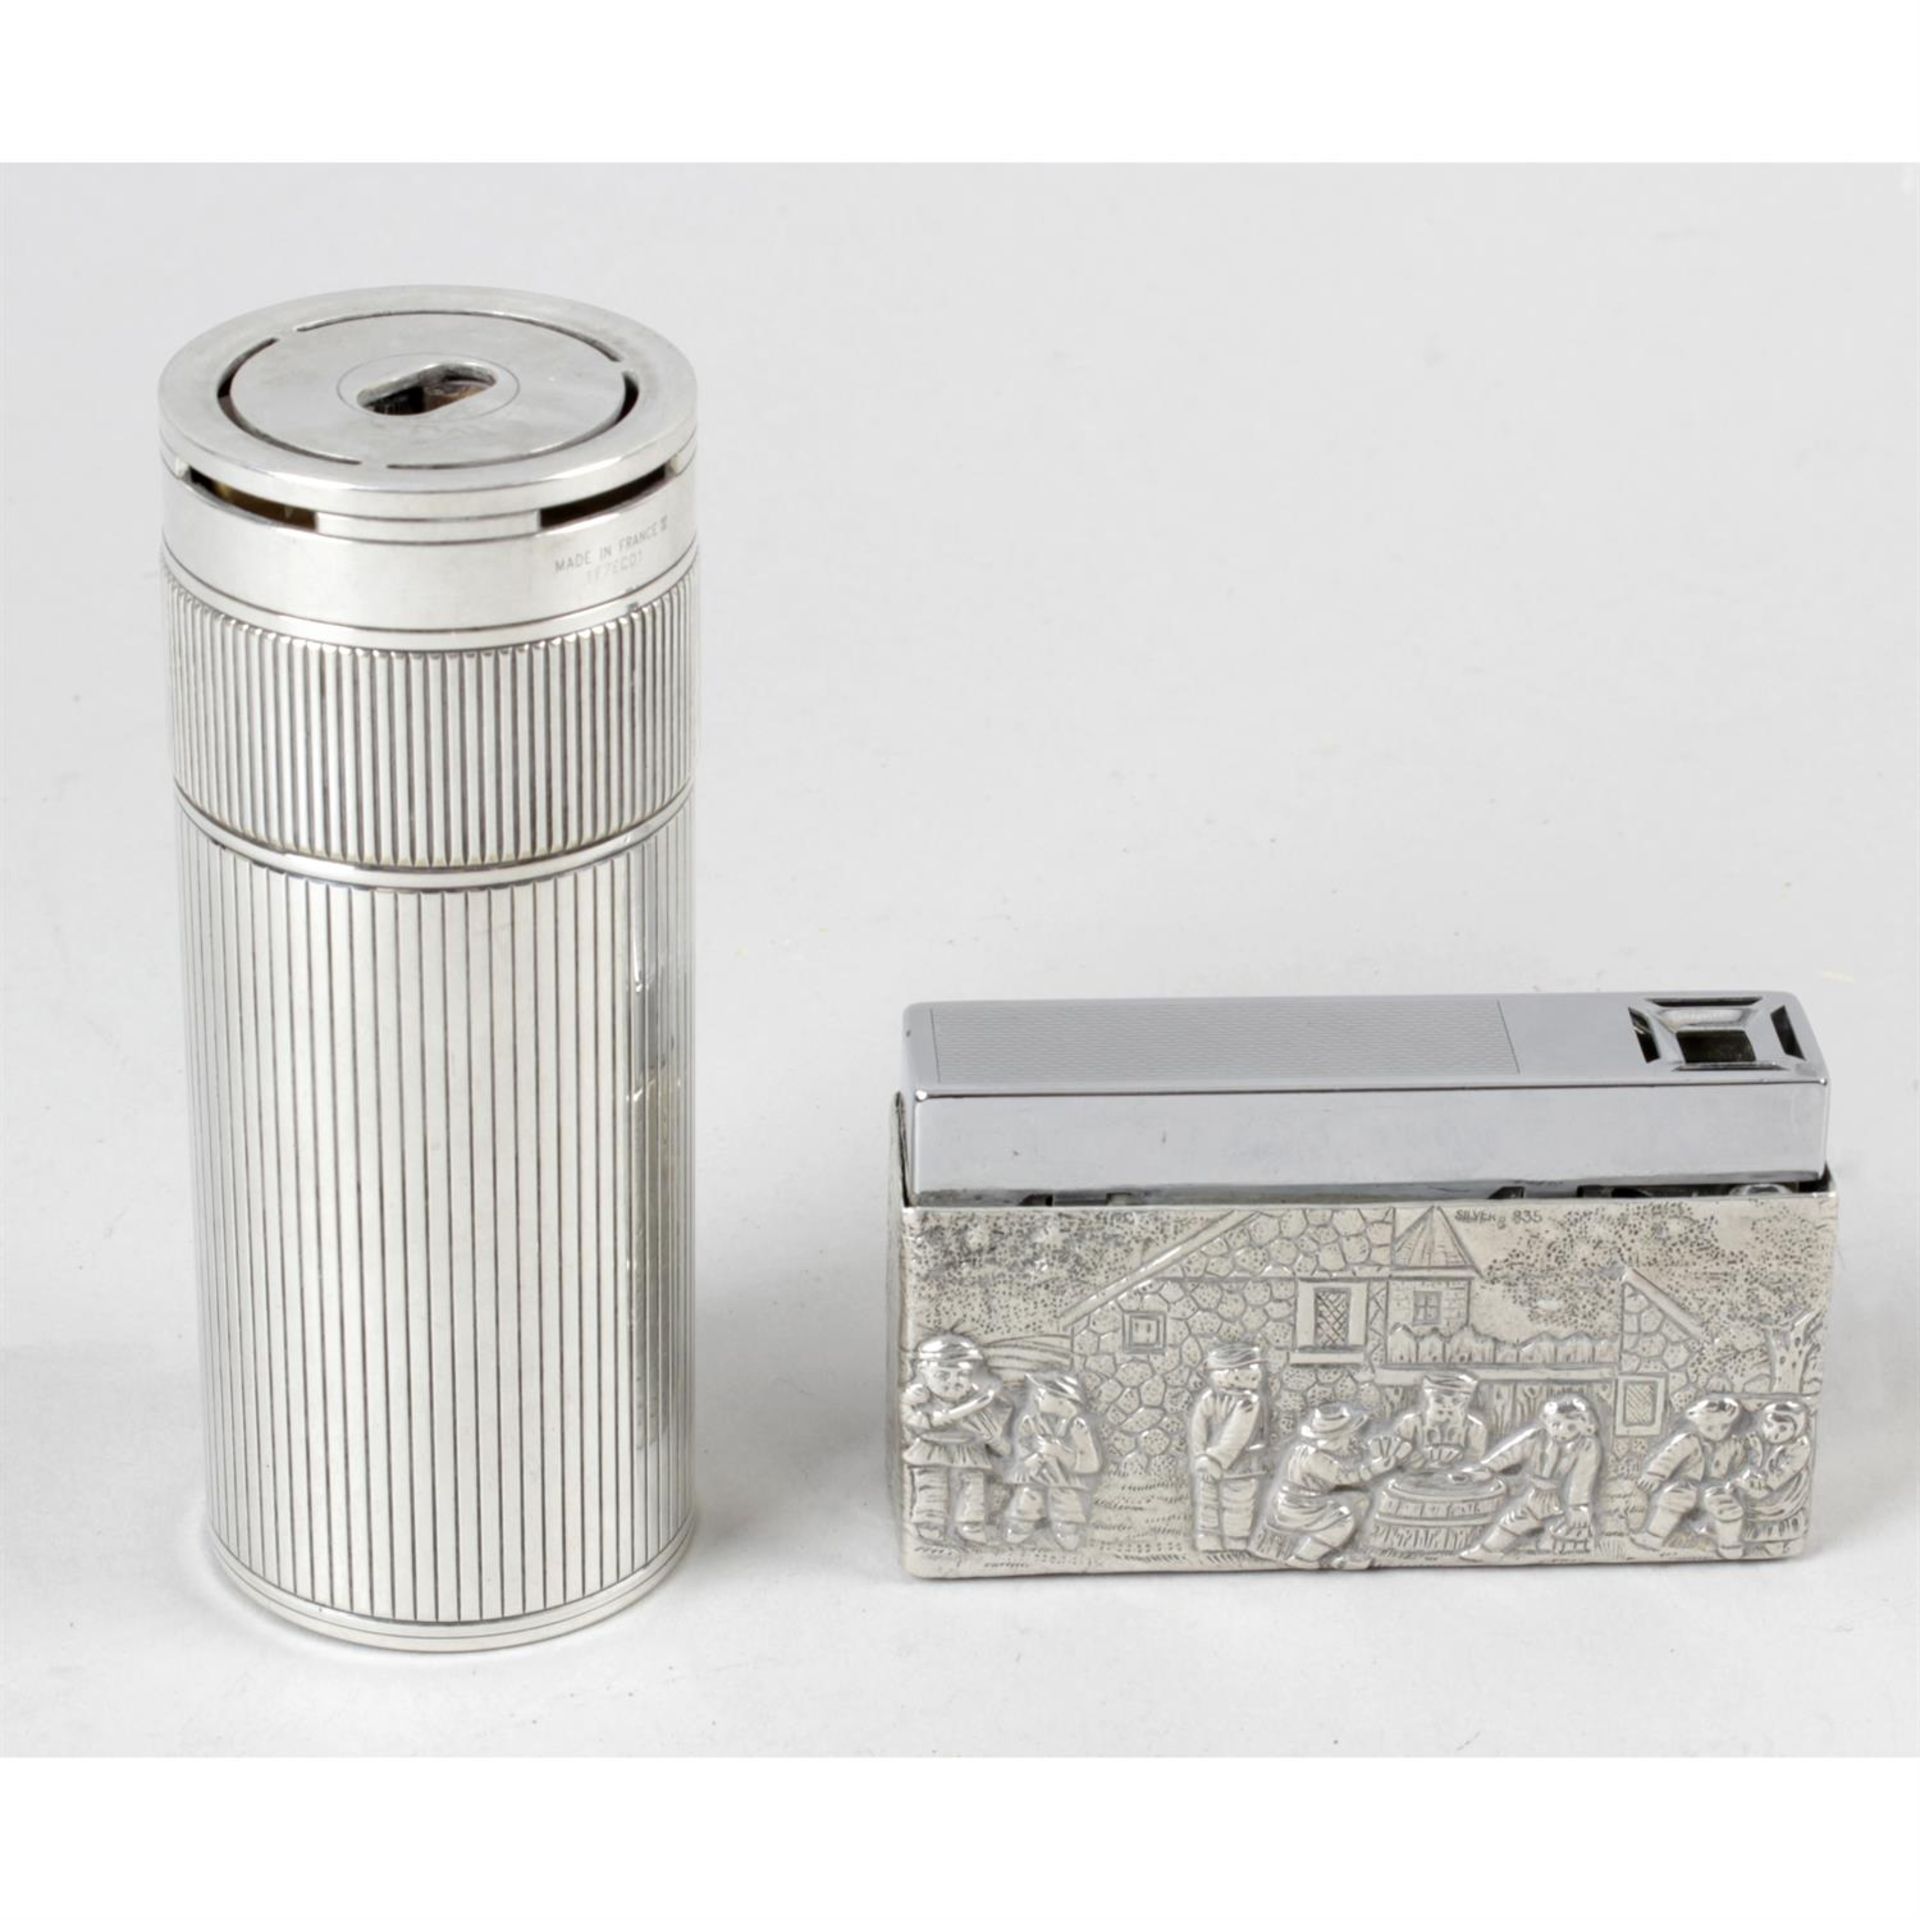 A Dupont table lighter, together with another lighter.